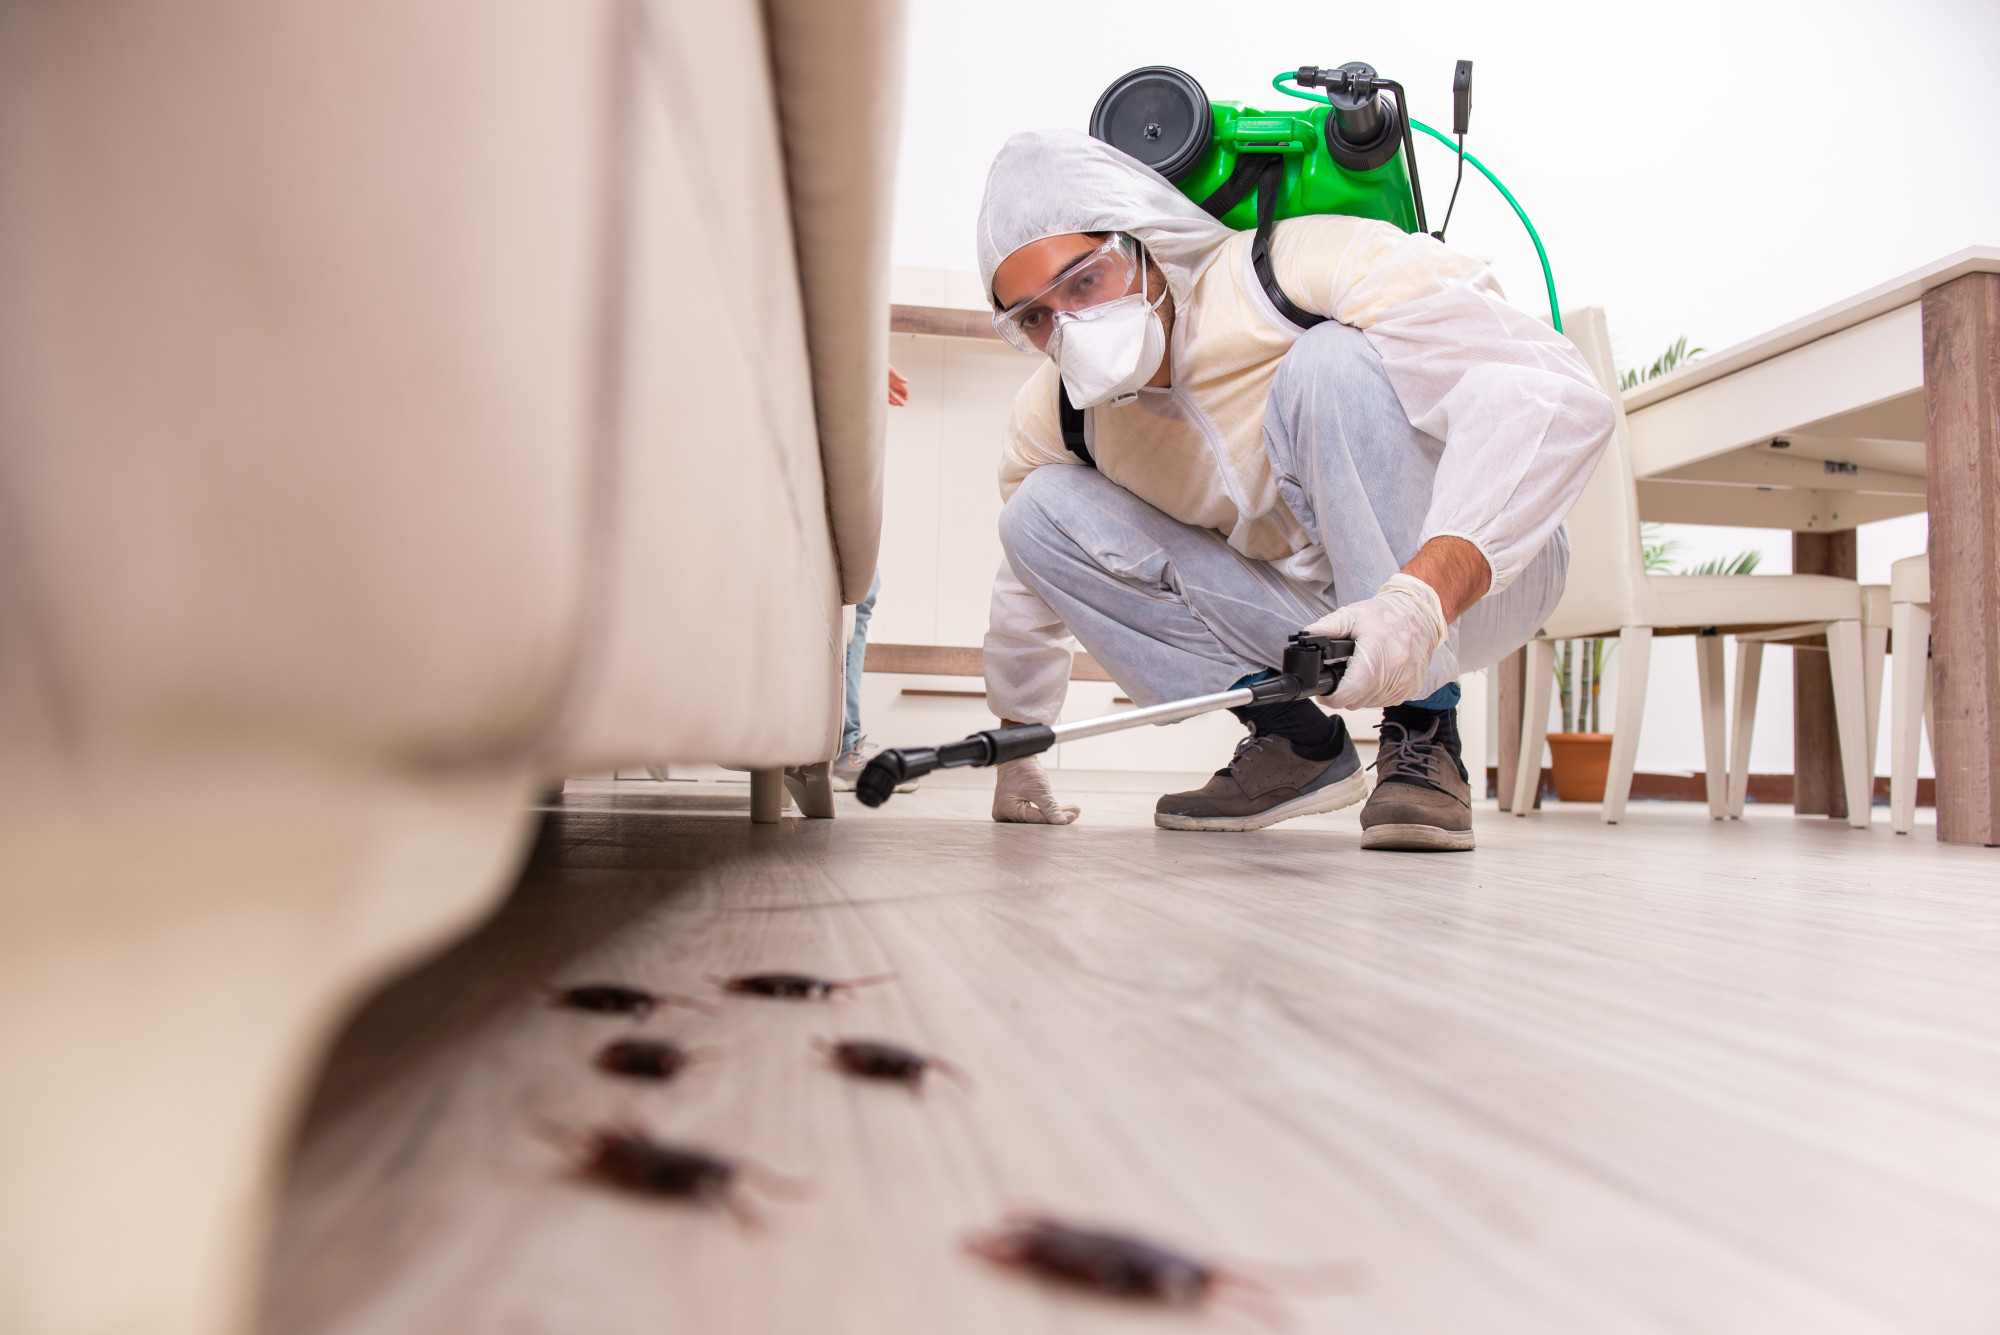 What are some common household pests and how can you recognize them? Read this quick guide to know when bugs are in your home and how to get rid of them!